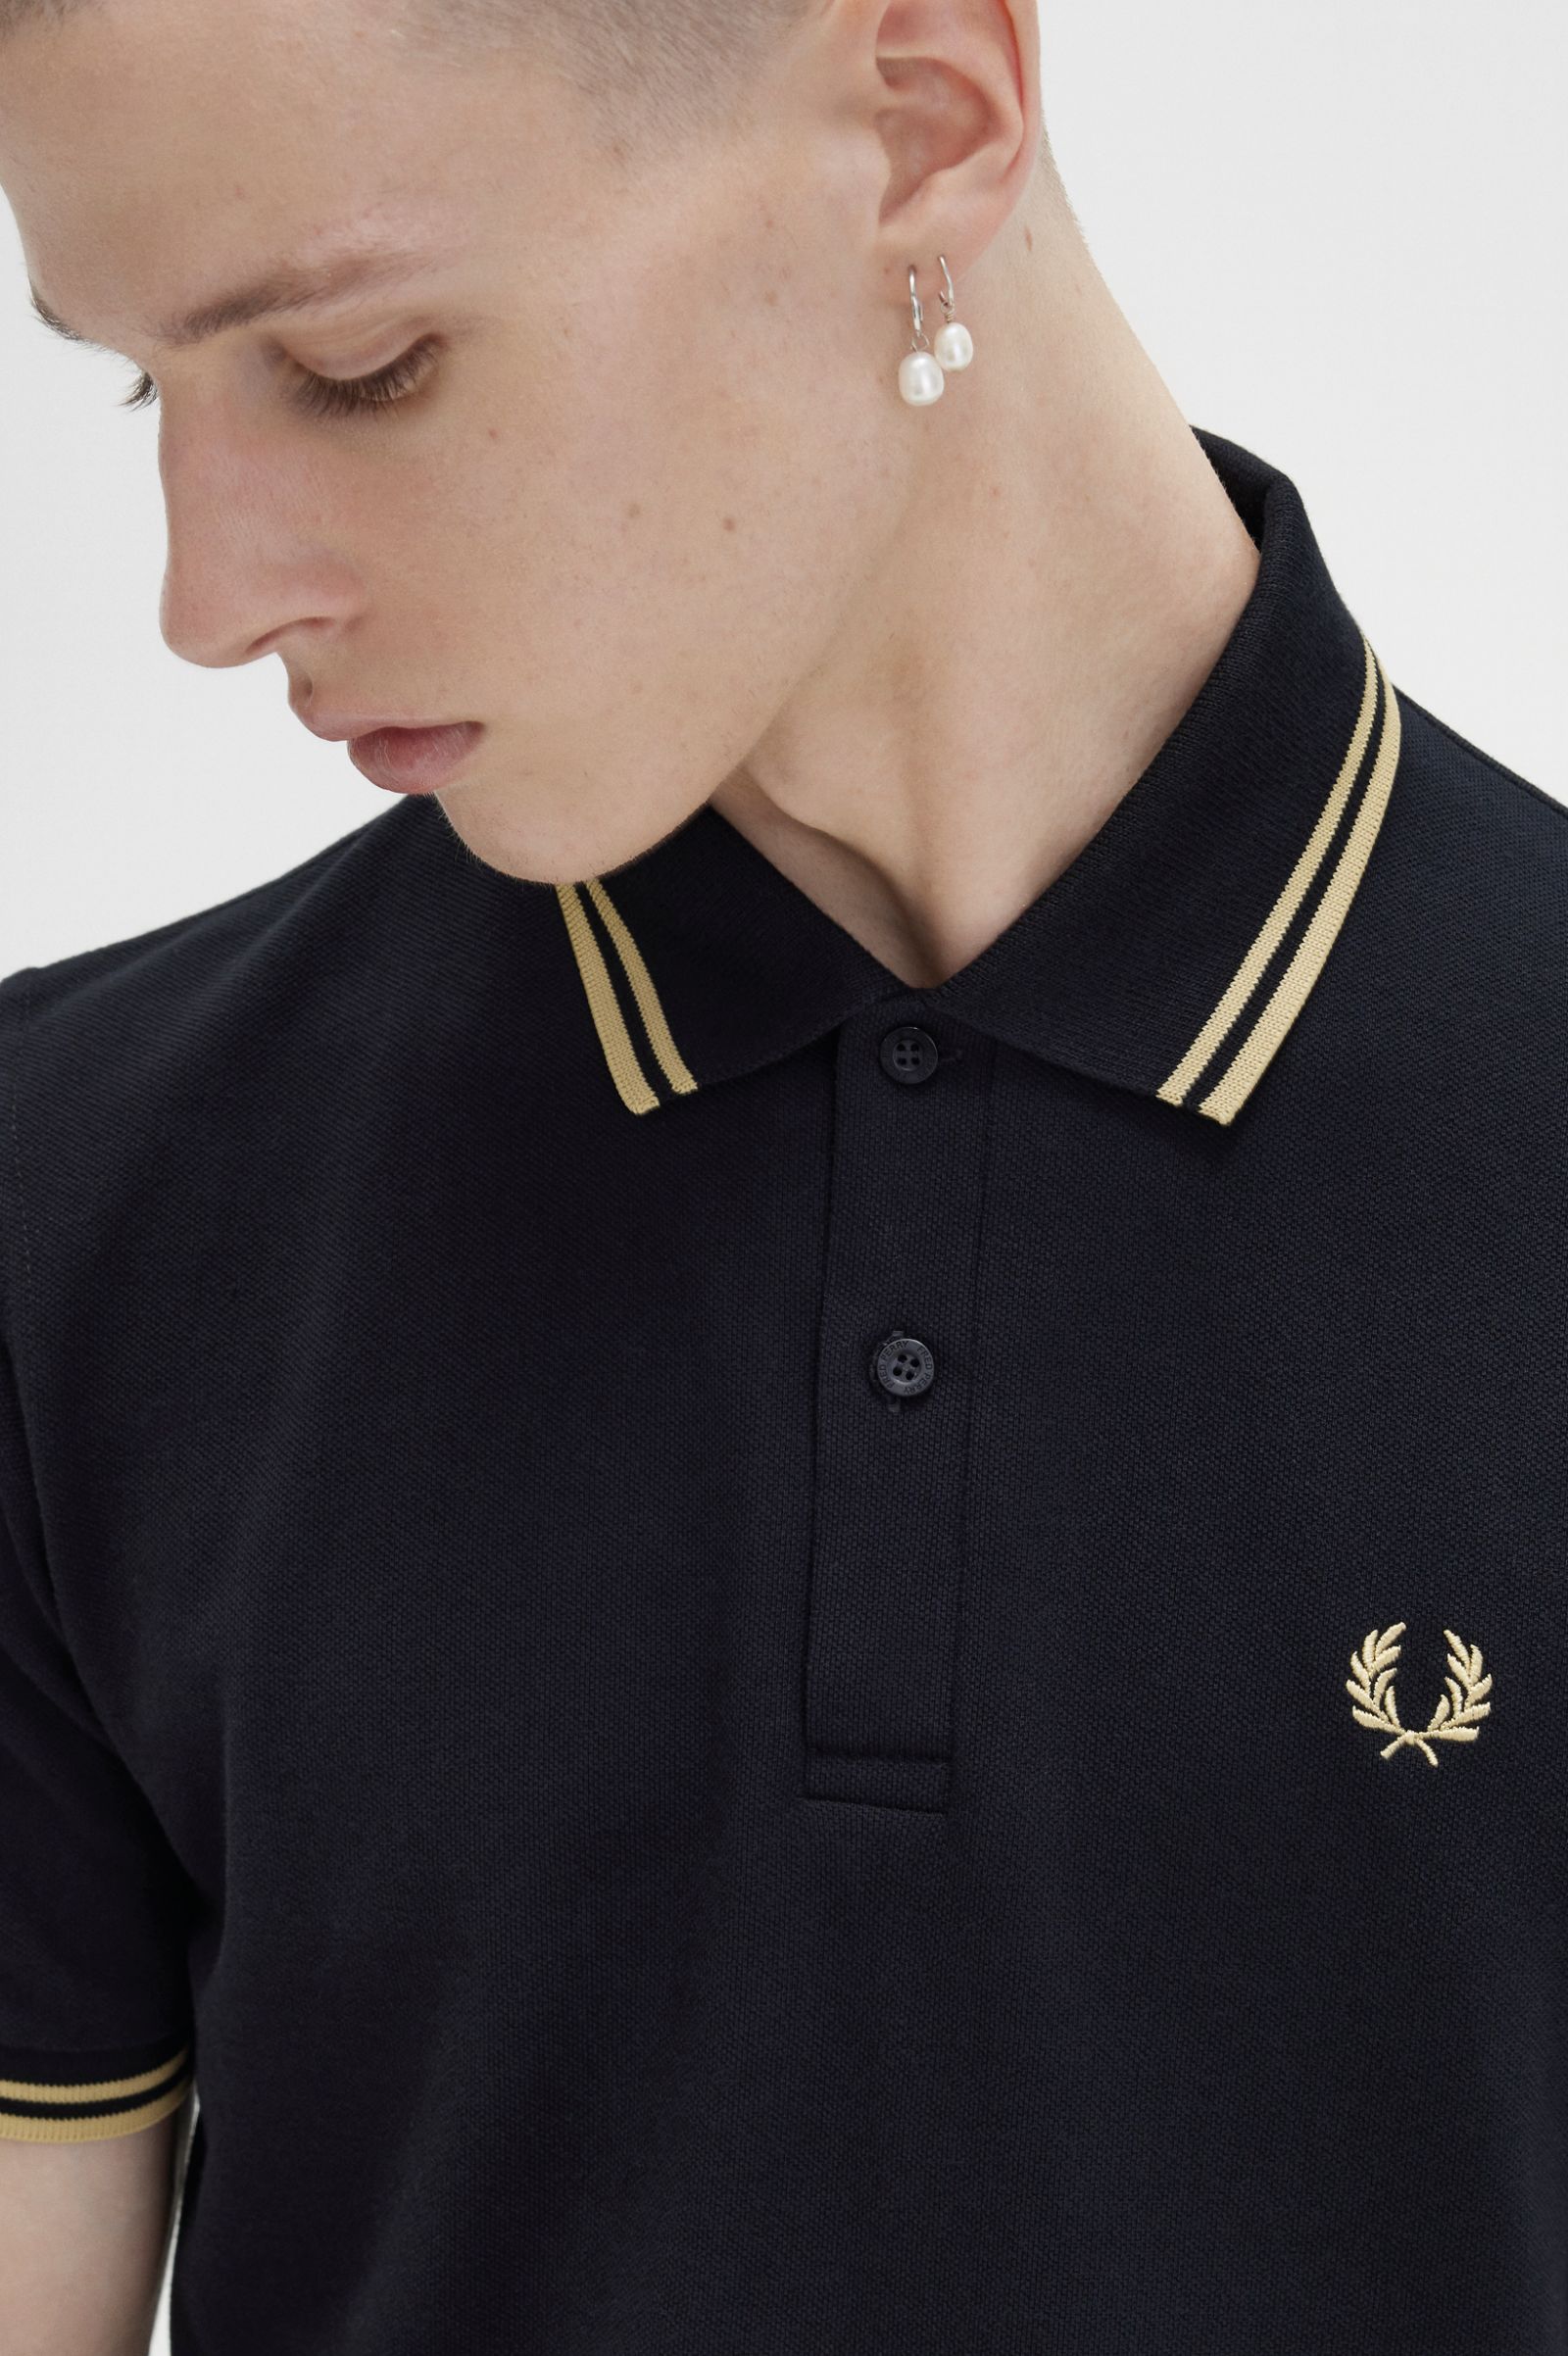 M12 - Black / Champagne / Champagne | The Fred Perry Shirt | Men's